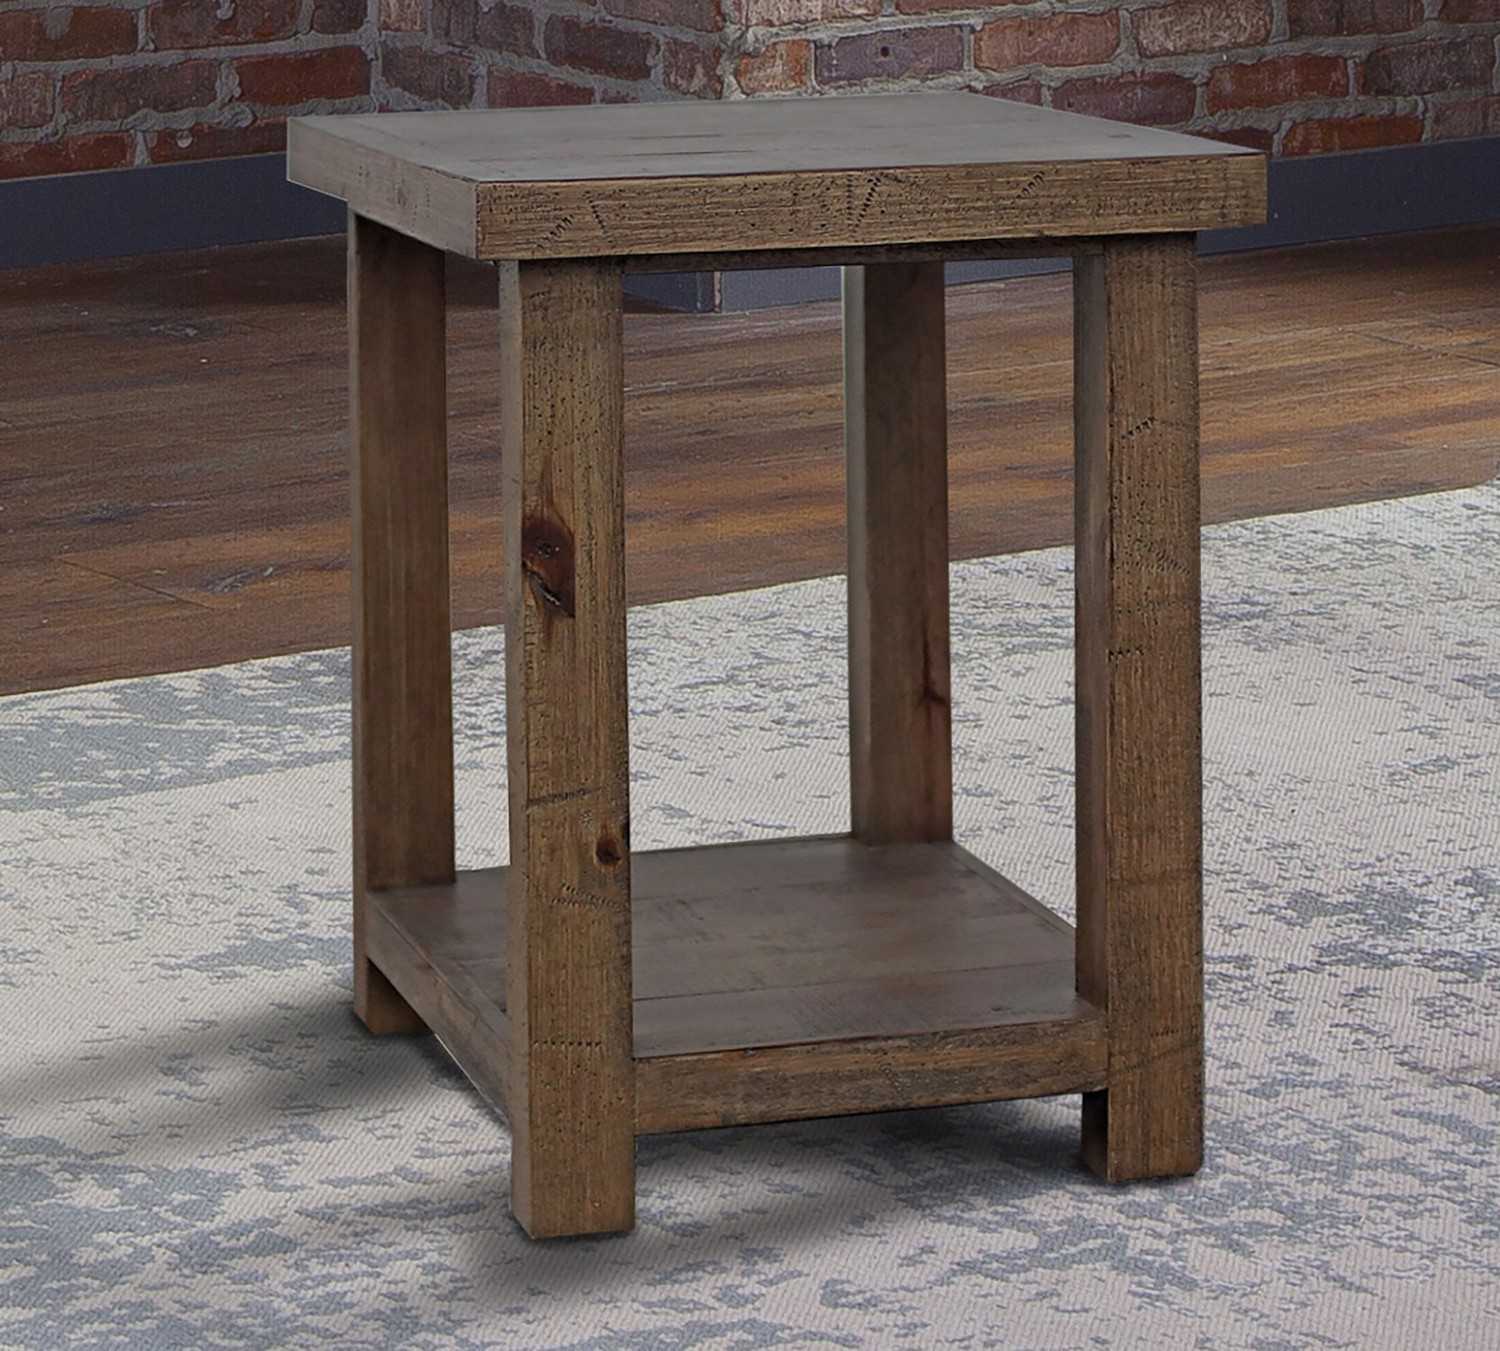 Parker House Lapaz Chairside Table - Rustic Worn Pine